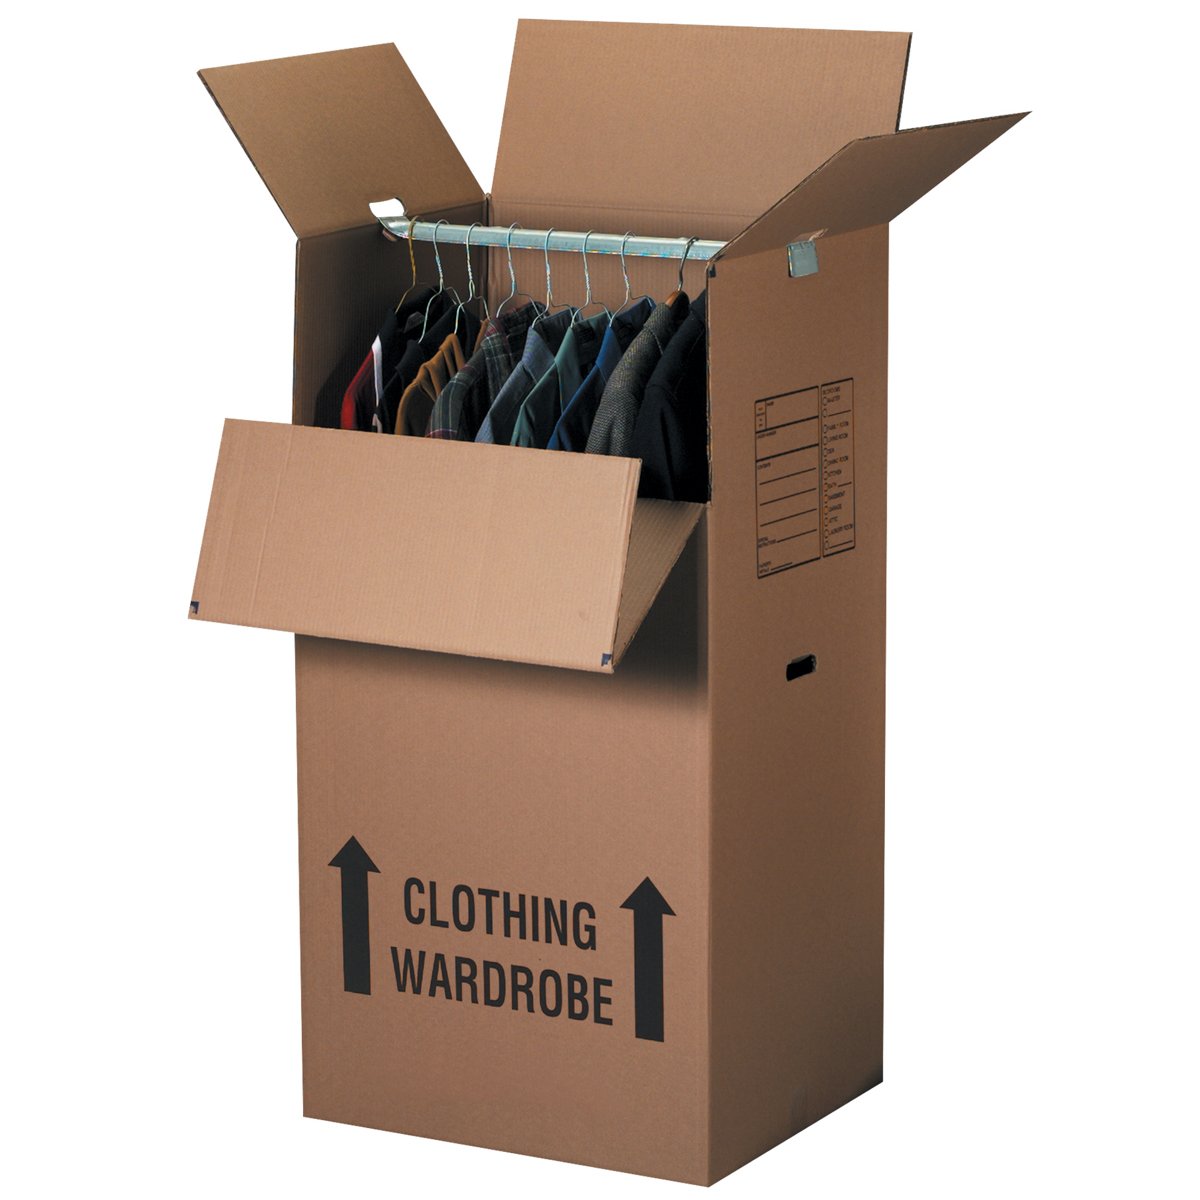 3-Pack of Wardrobe Boxes w/ Hanger Bars 24" x 24" x 40" - 3 Boxes/Case